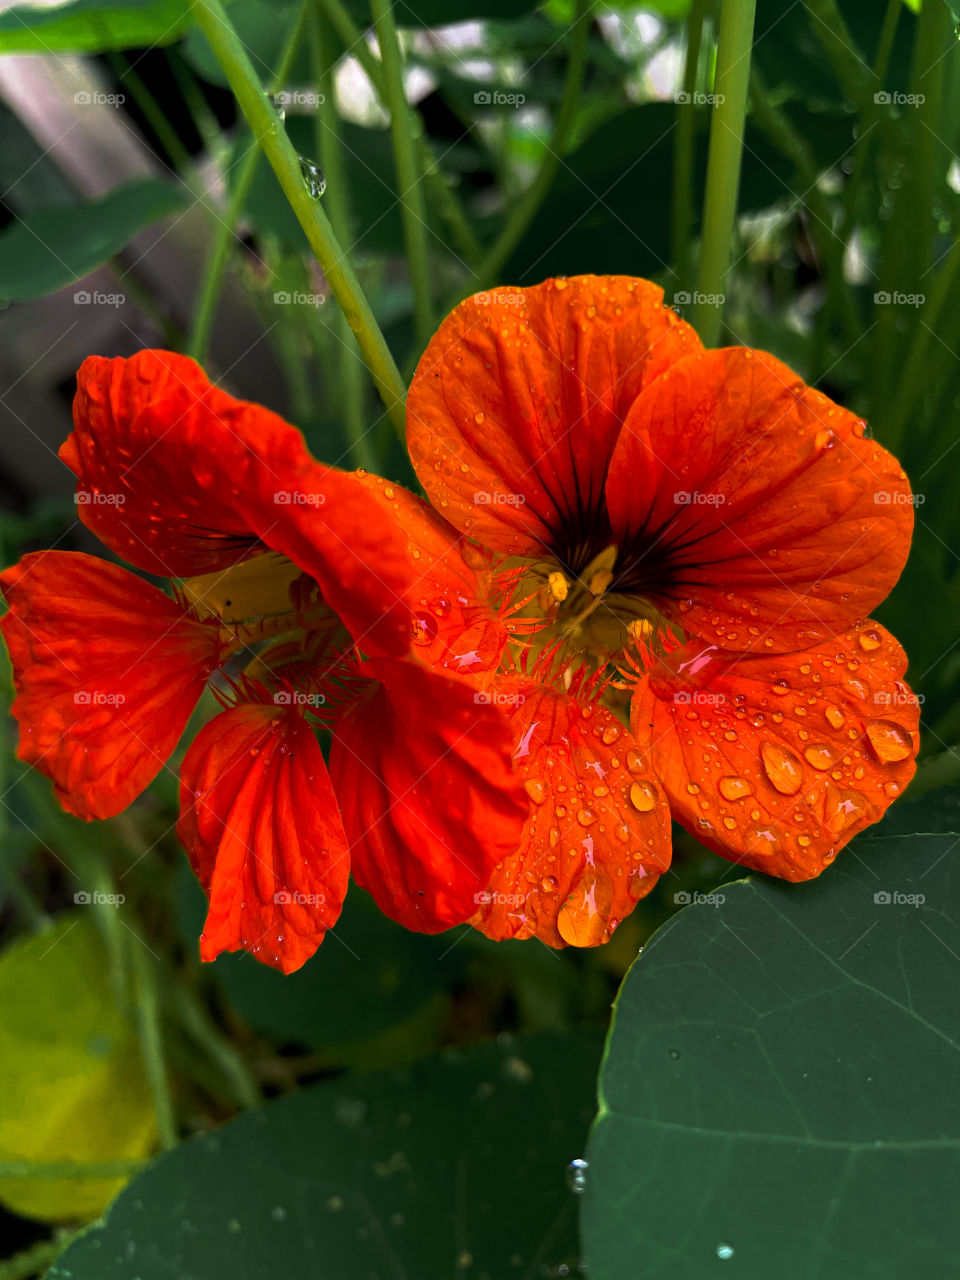 leaf rainfall green raindrops waterdrops droplets wet water rain drop outside nature outdoors elements dew dewdrops plant plants leafs Grass splashes phone photography flower flowers red Orange